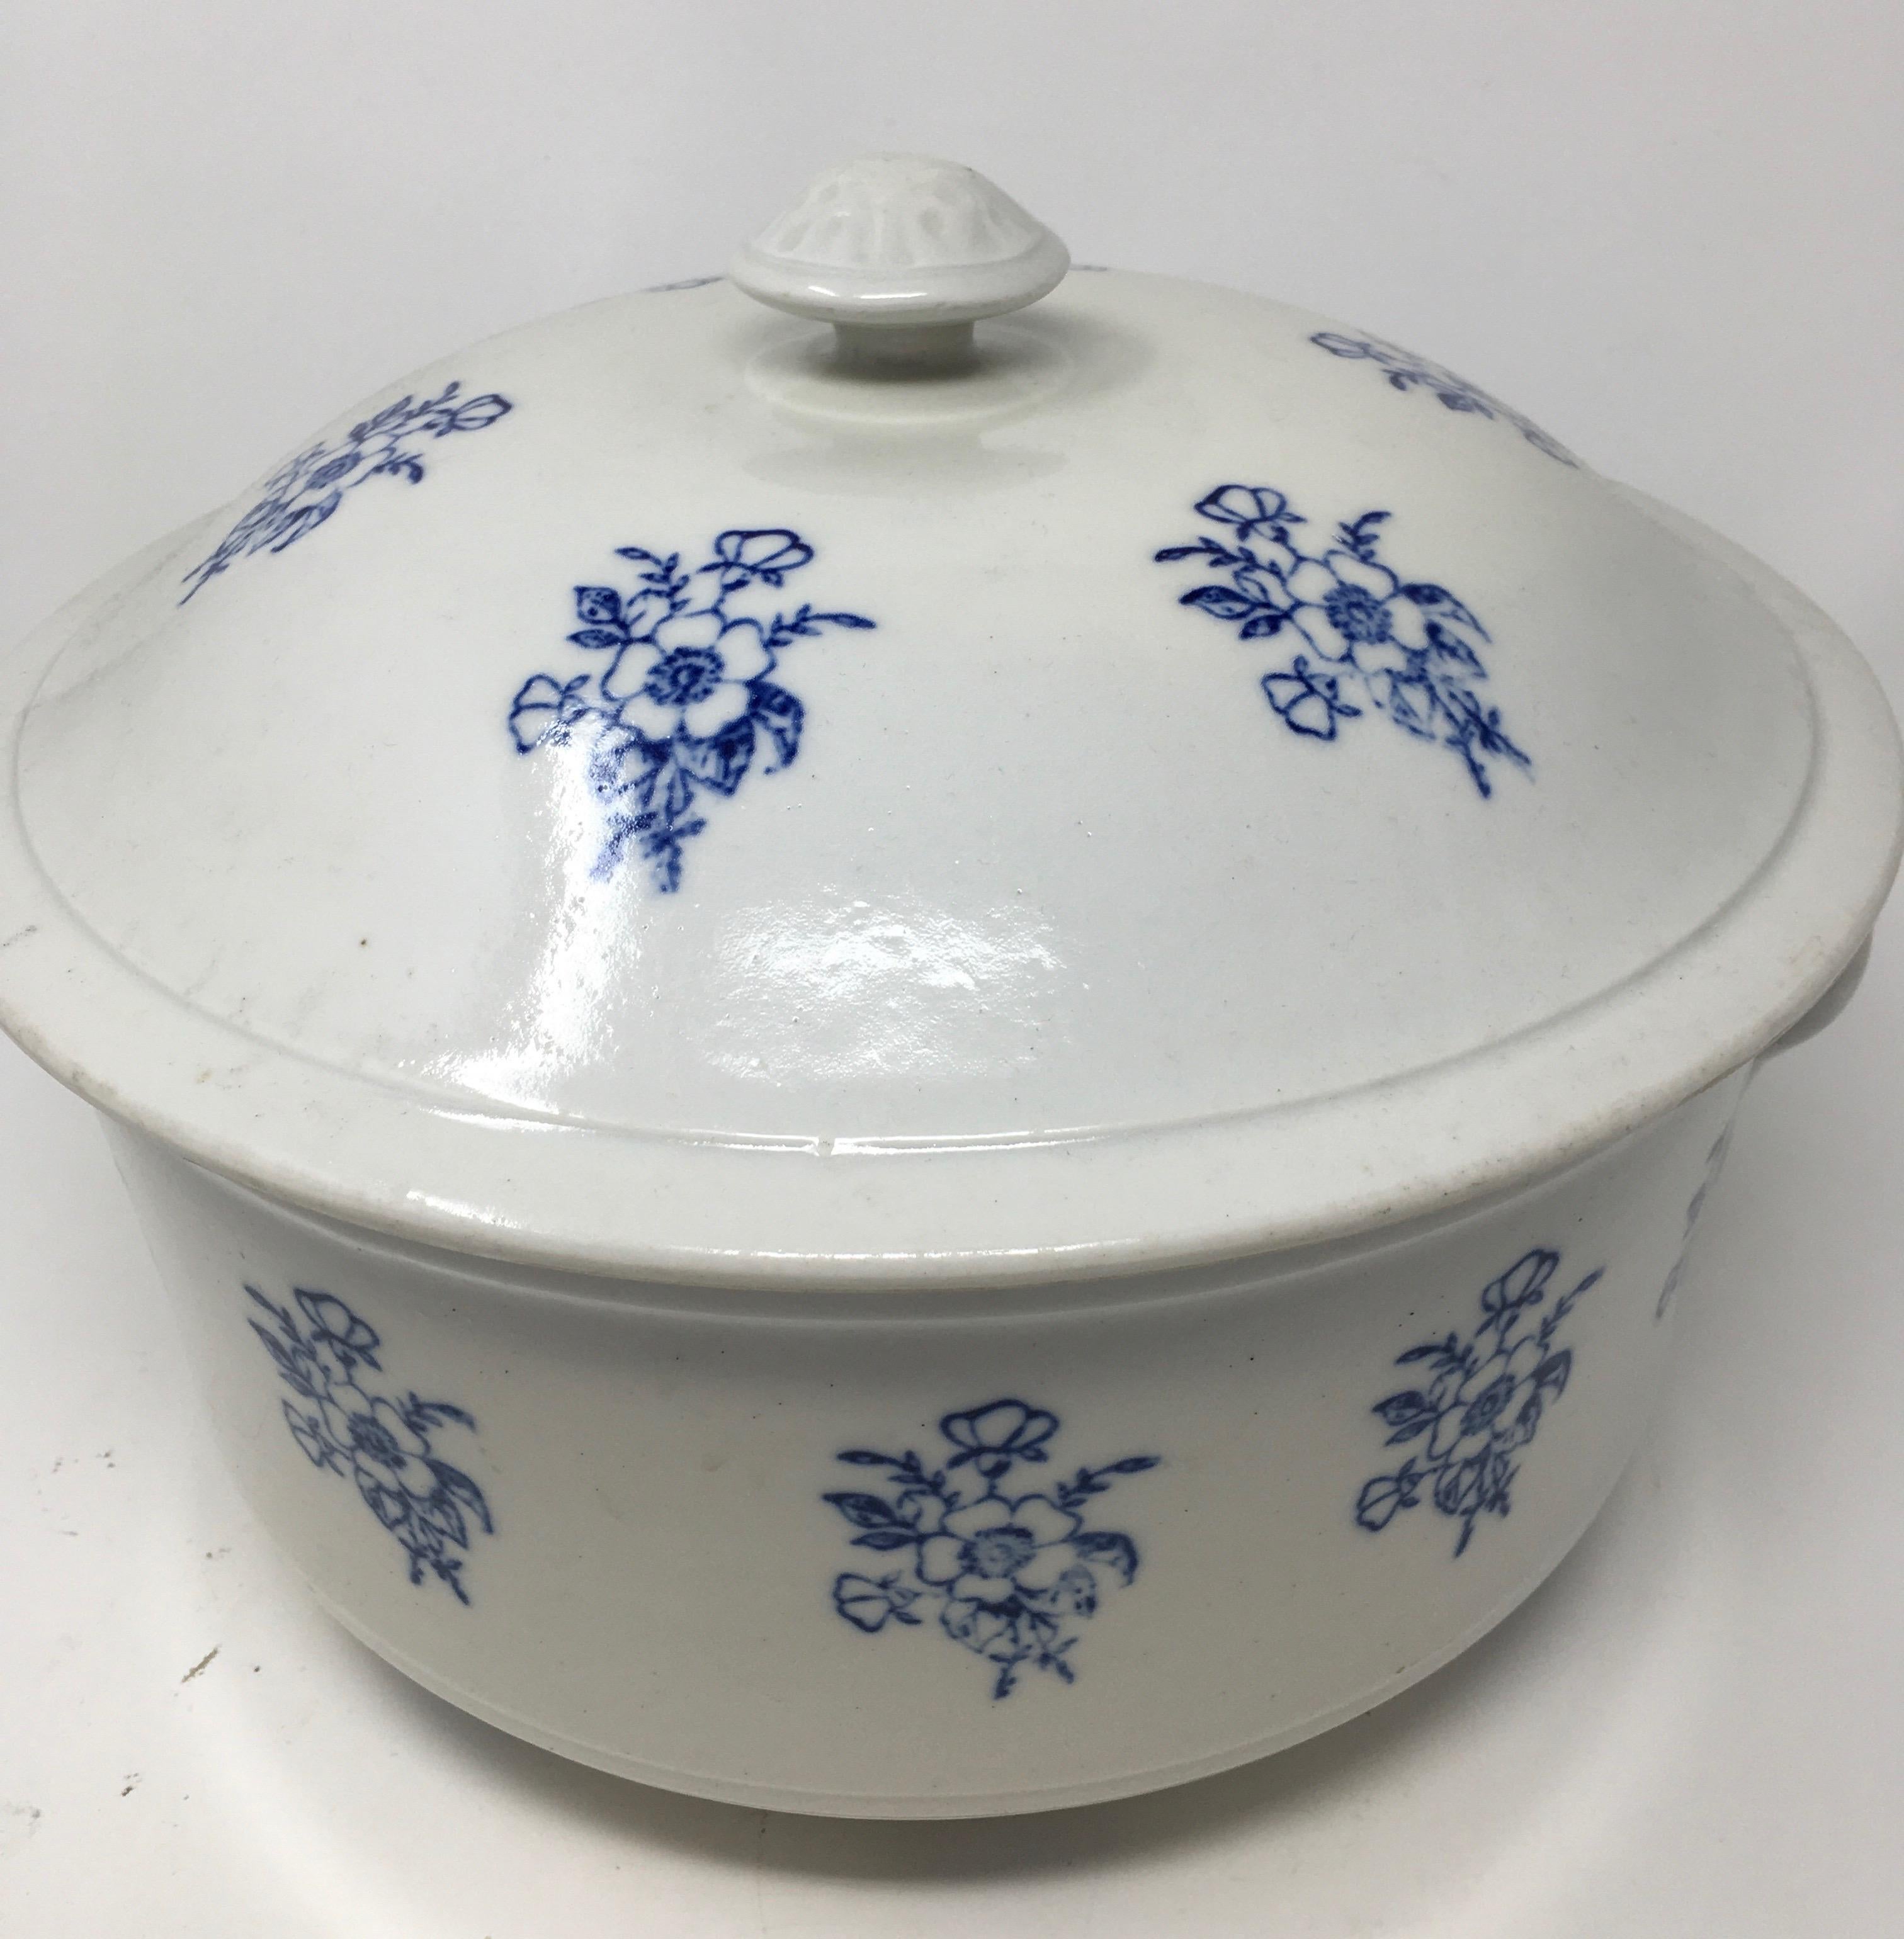 Found in England, this is a beautiful blue and white ironstone tureen. The piece, with blue transfer detailing has wonderful patina and is in very good condition, complete with its knob handle on the lid and two handles on the bowl.